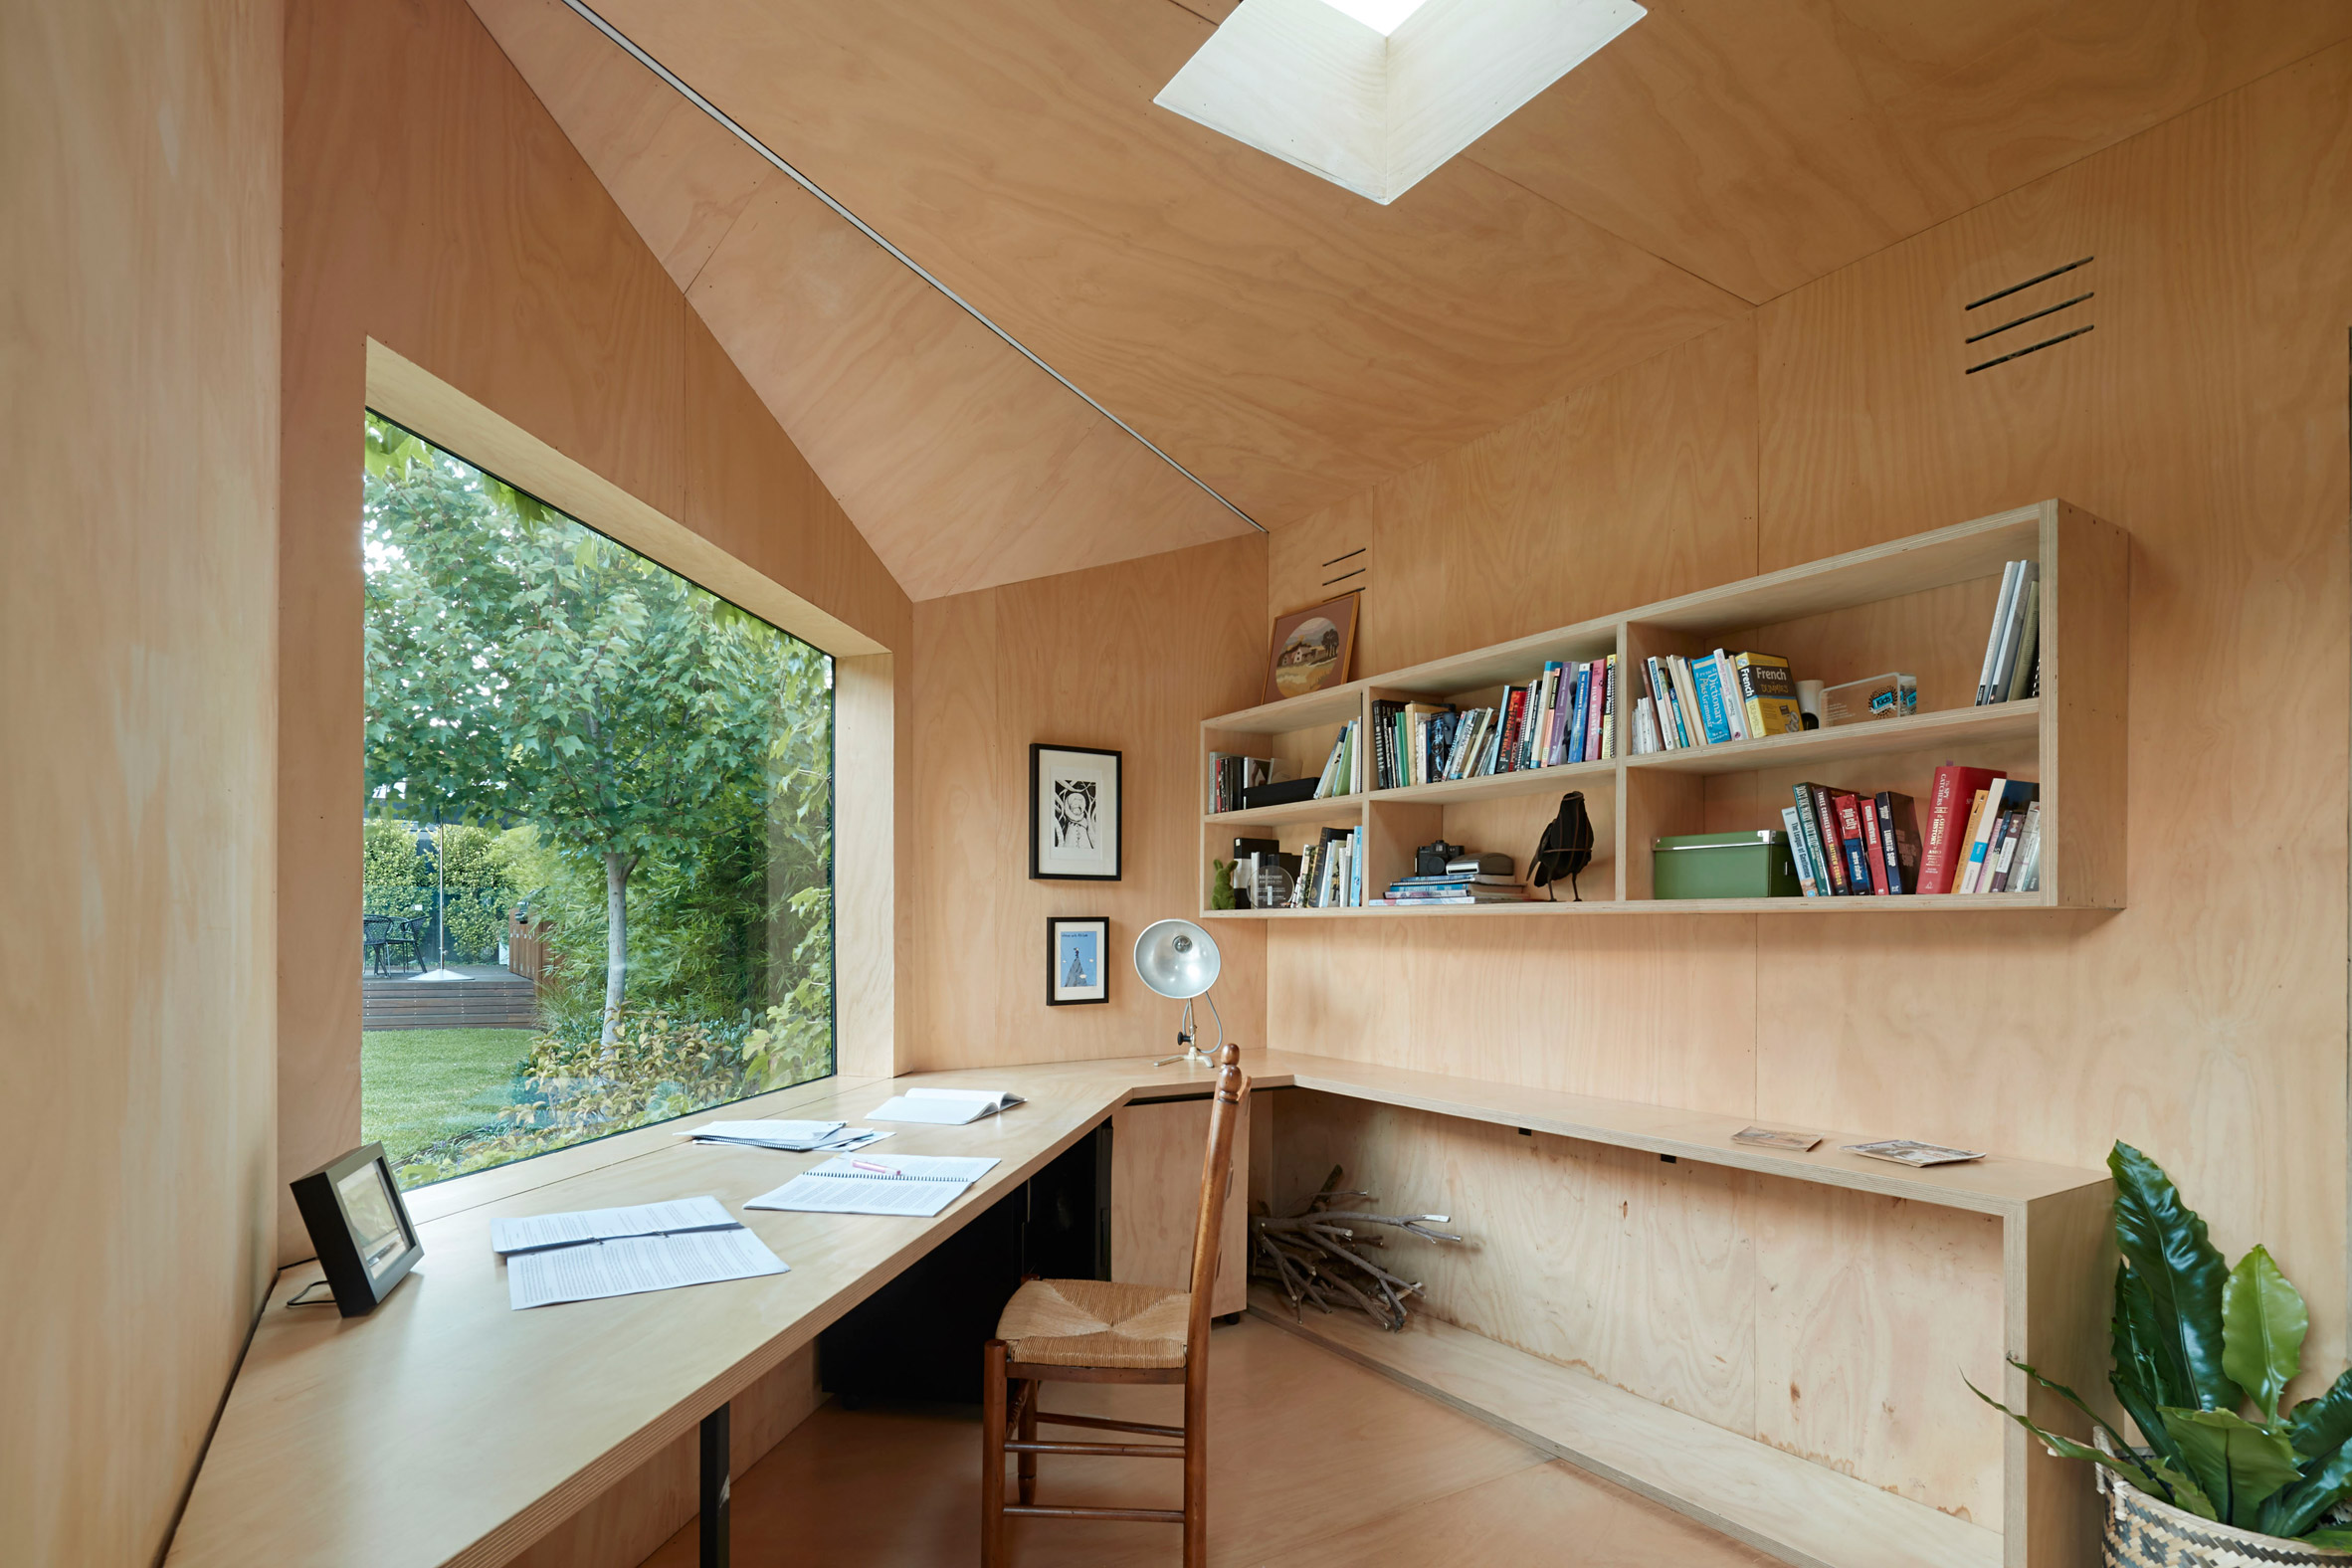 Writer's Shed interior by Matt Gibson